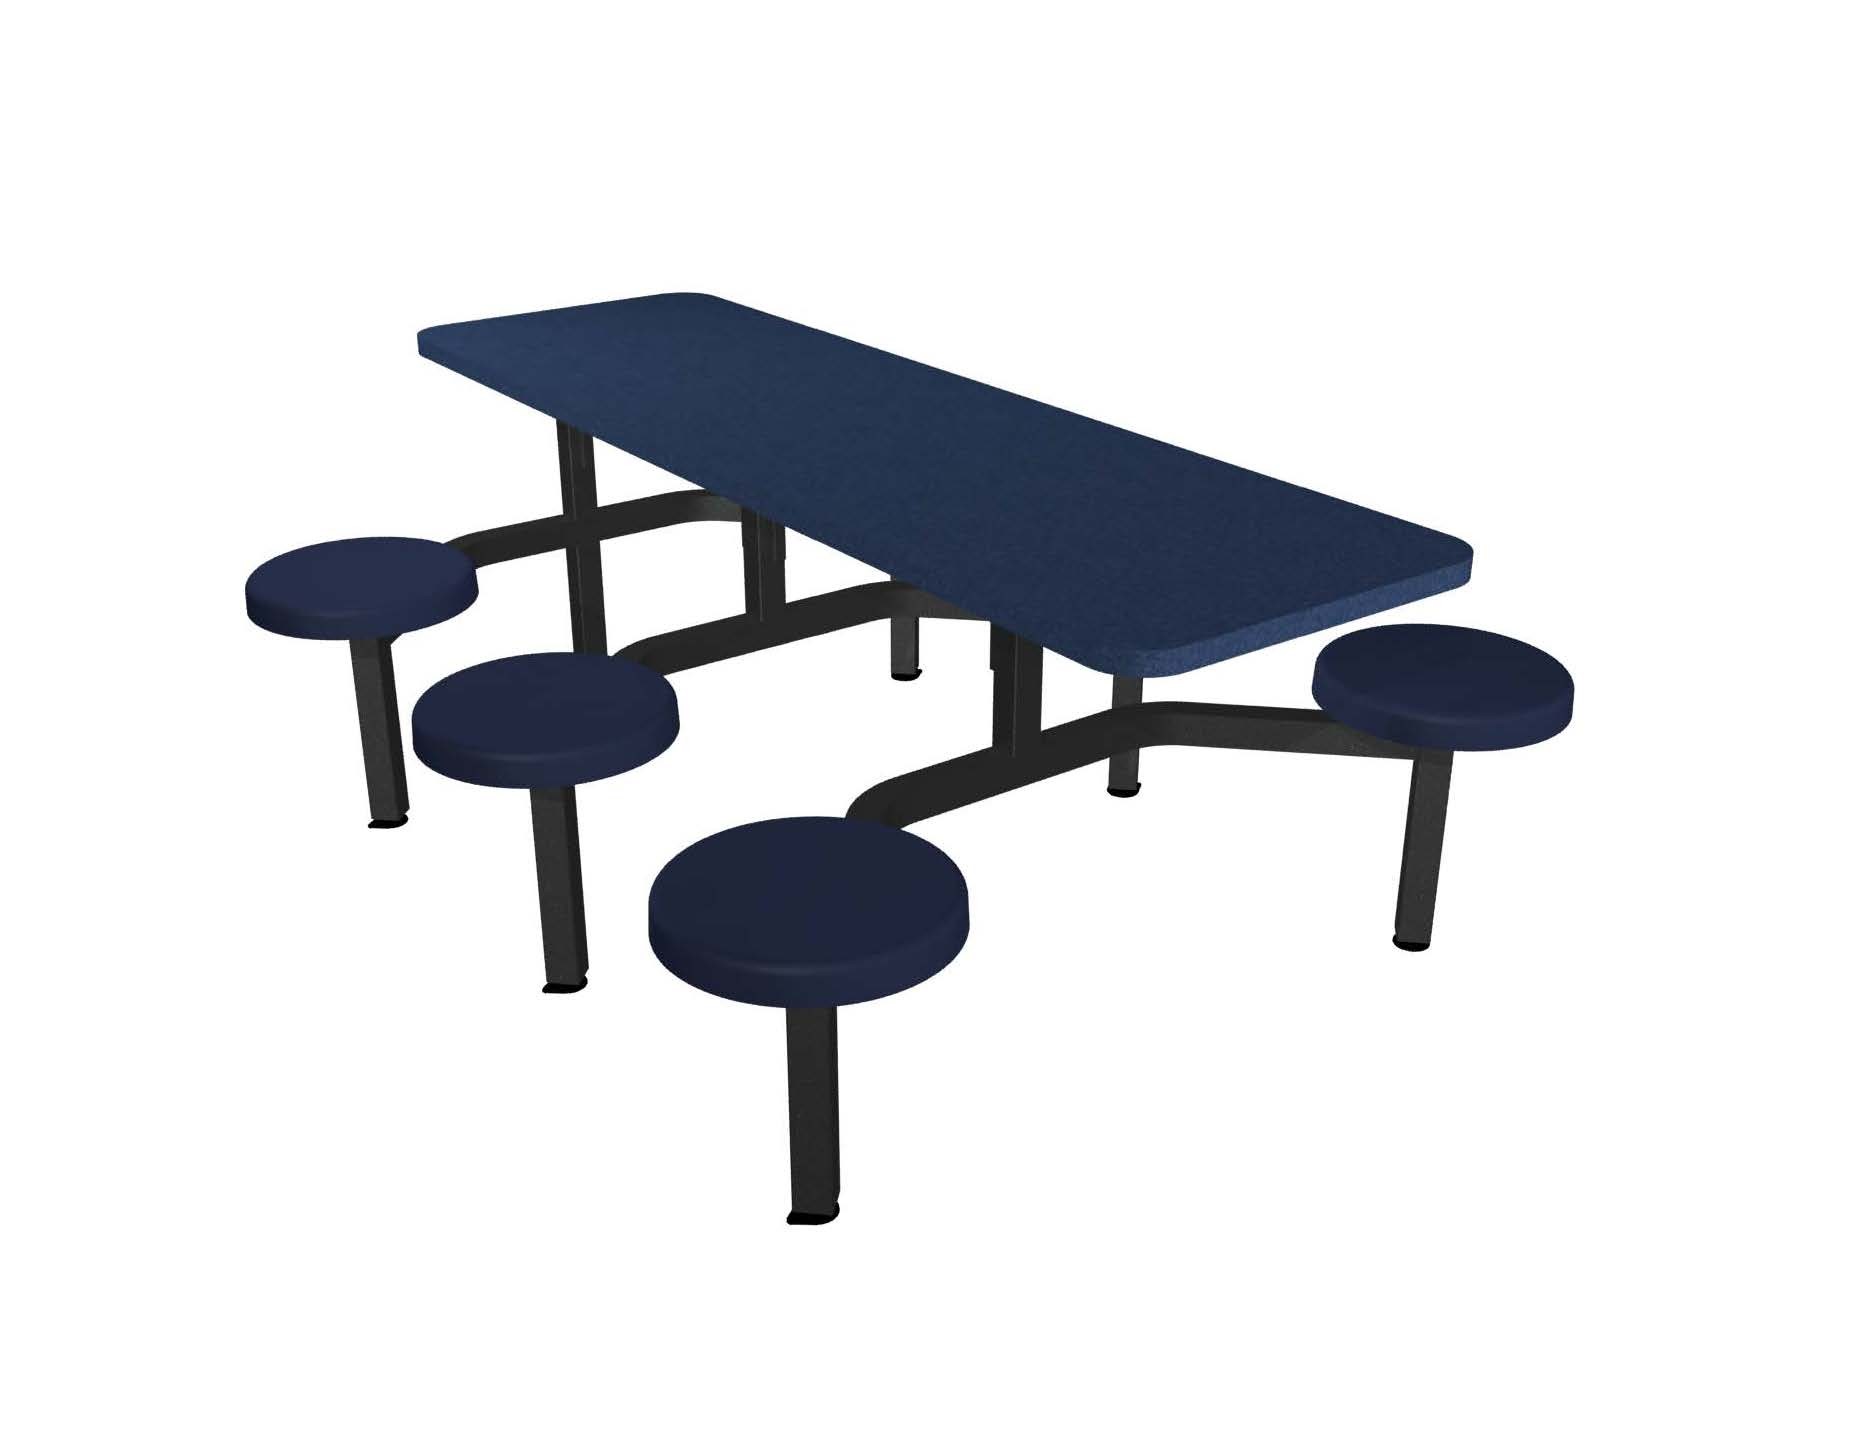 Navy Legacy laminate table top and edge, Composite button seat in Navy